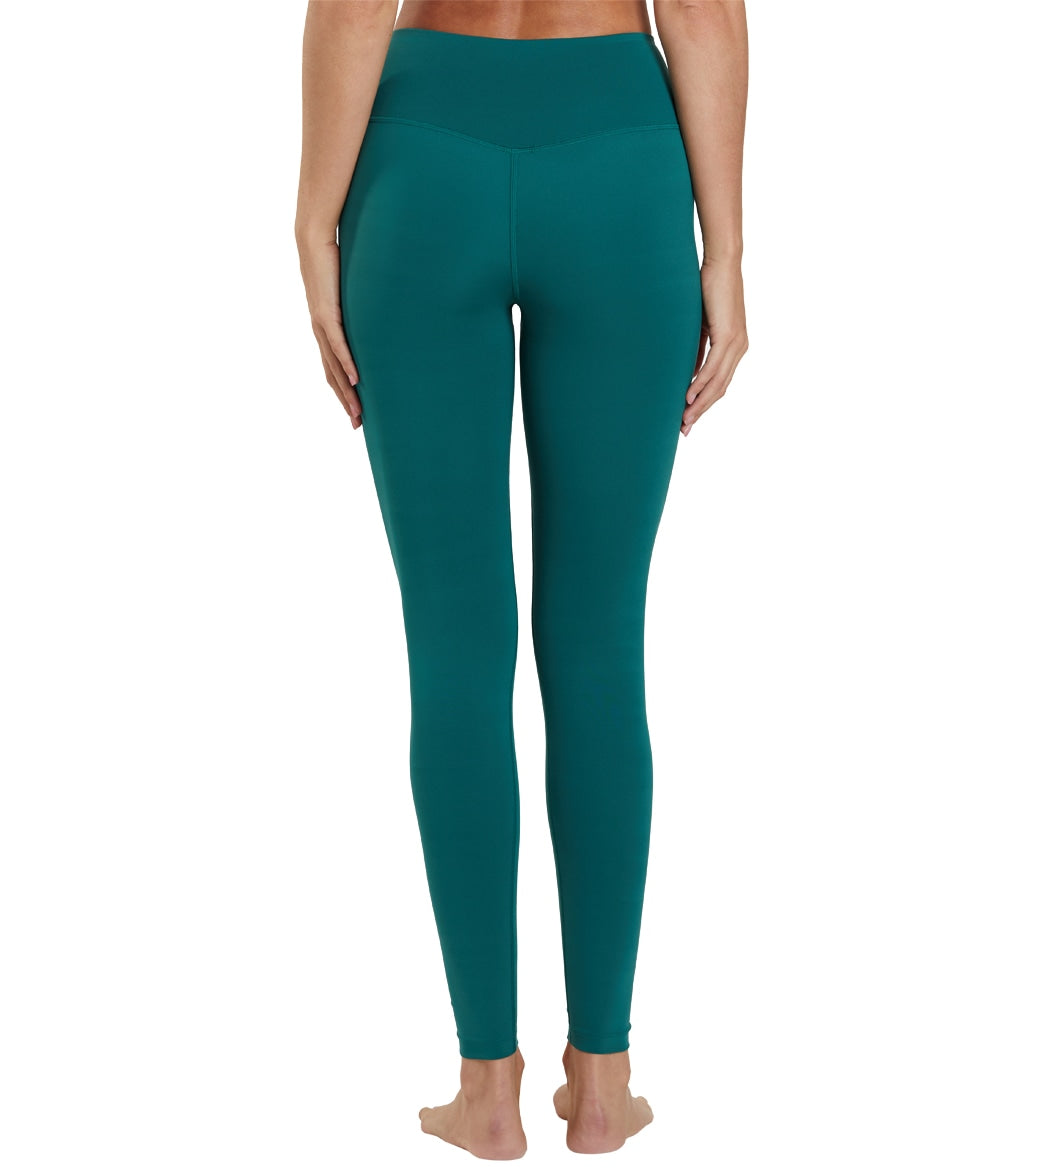 Girlfriend Collective FLOAT Full Length Seamless High Rise Legging 28.5 at   - Free Shipping